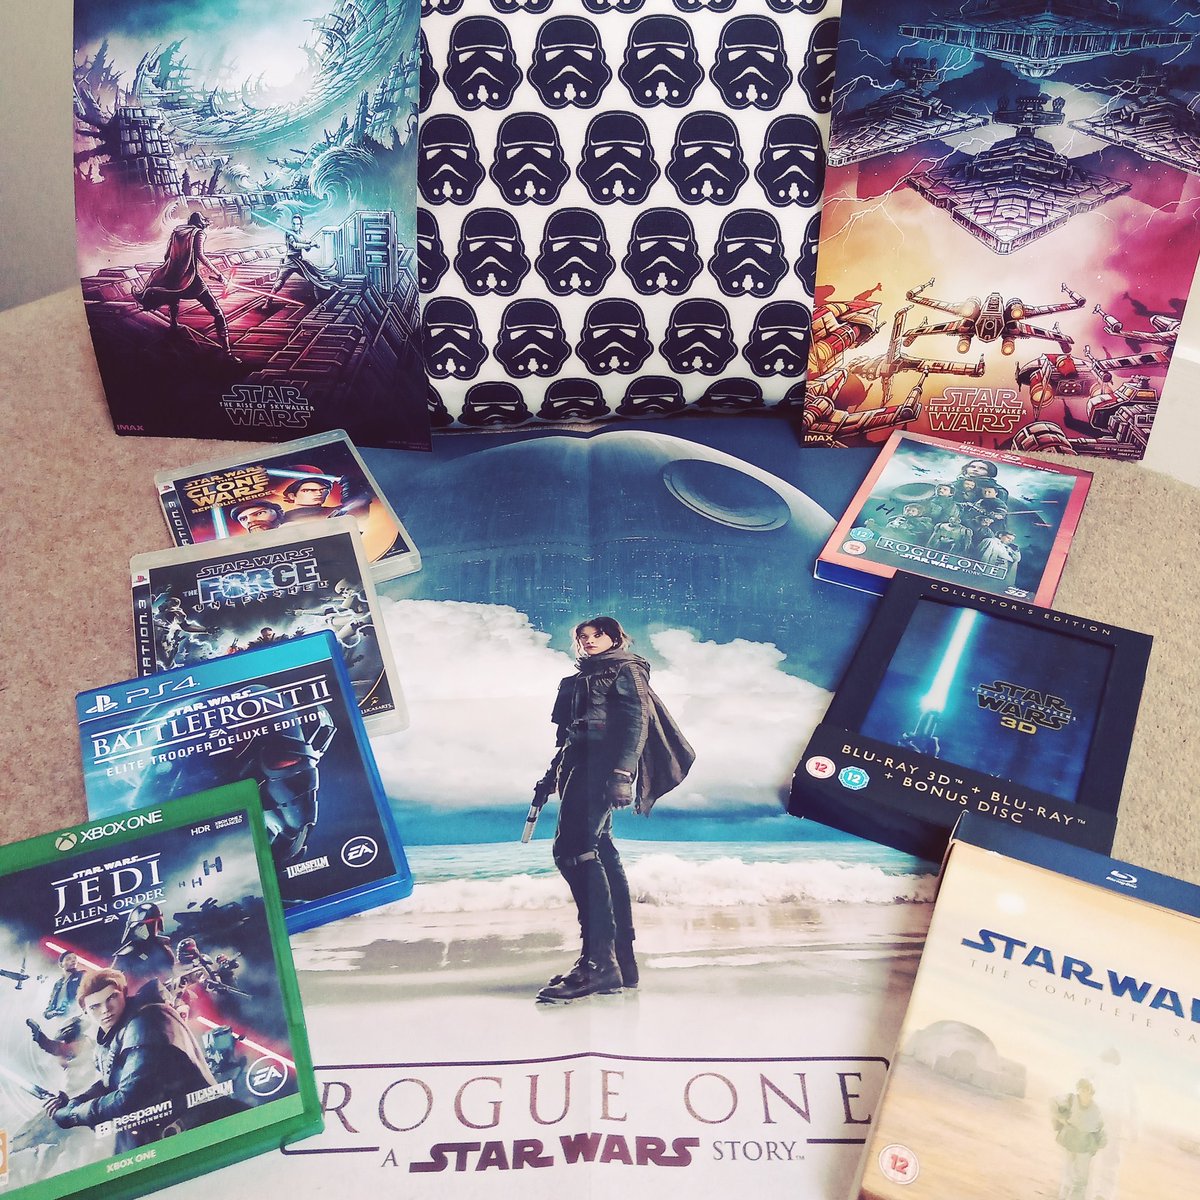 Happy Star Wars Day!

#may4th #maythe4thbewithyou #starwarsday #starwars #movies #gaming #gamers #filmfan #bluray #3dbluray #collectorsedition #completesaga #clonewars #forceunleashed #battlefront2 #jedi #sith #galaxyfarfaraway #rogueone #riseofskywalker #anewhope #georgelucas